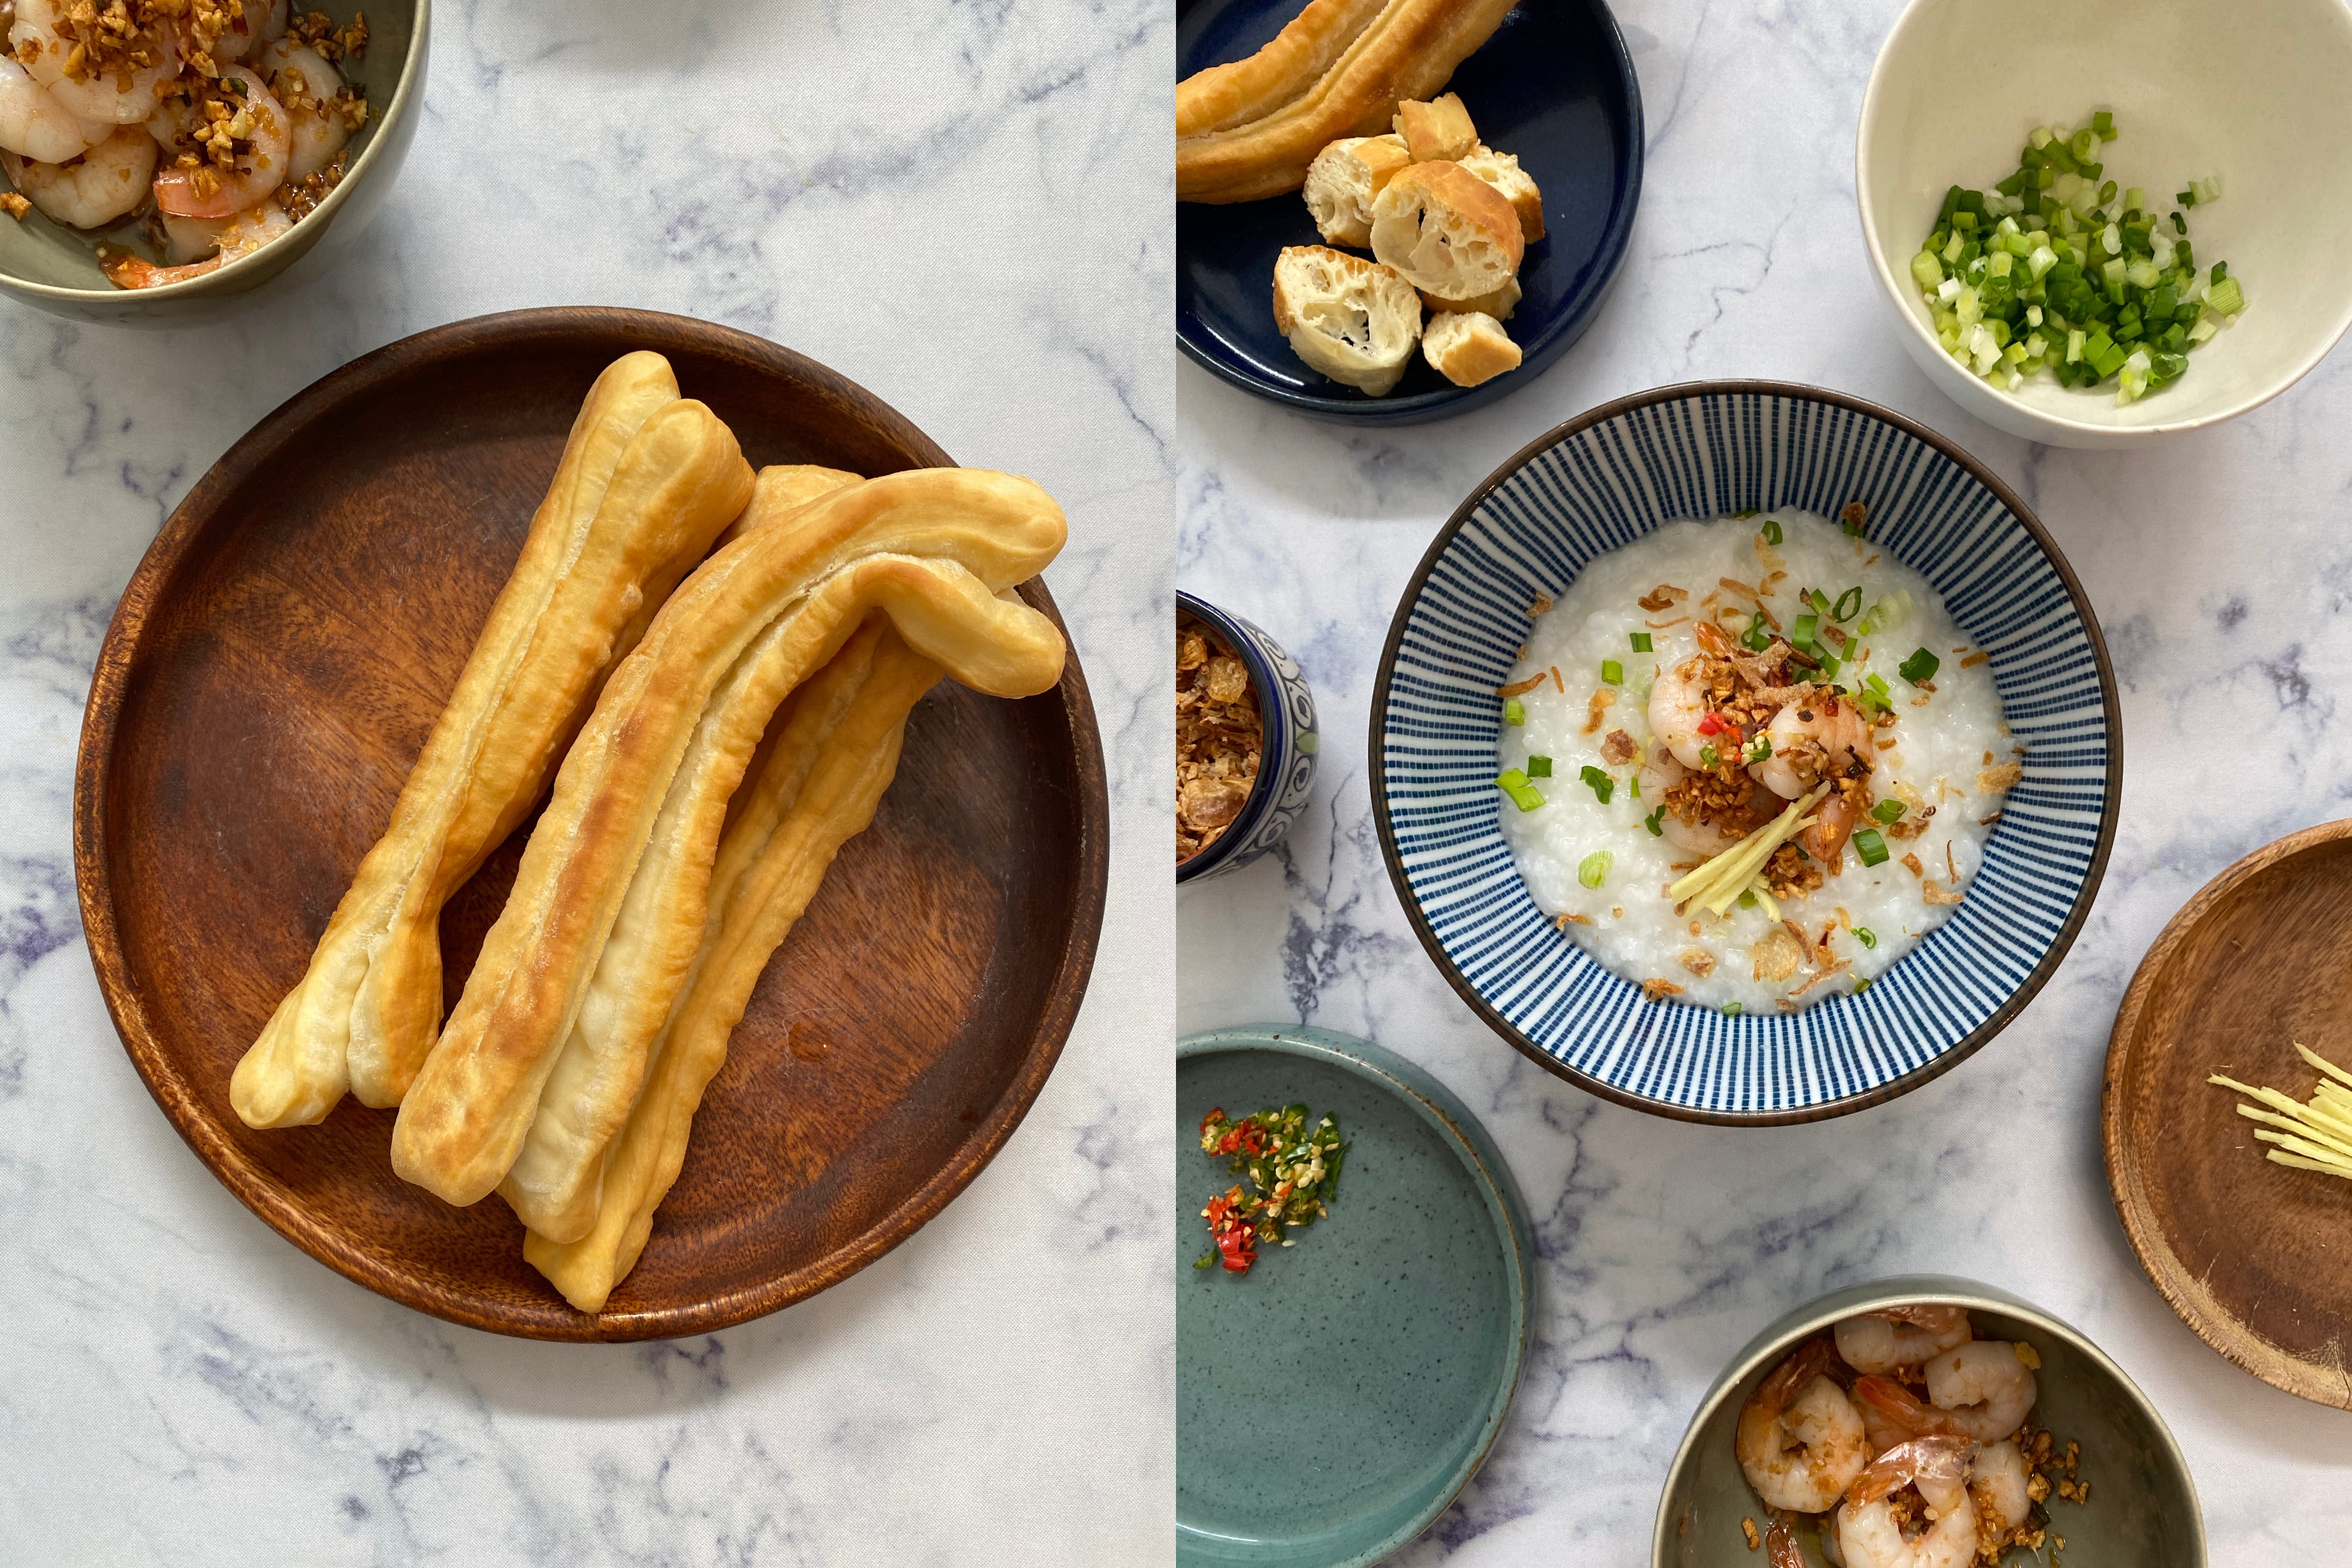 Youtiao and congee with shrimps